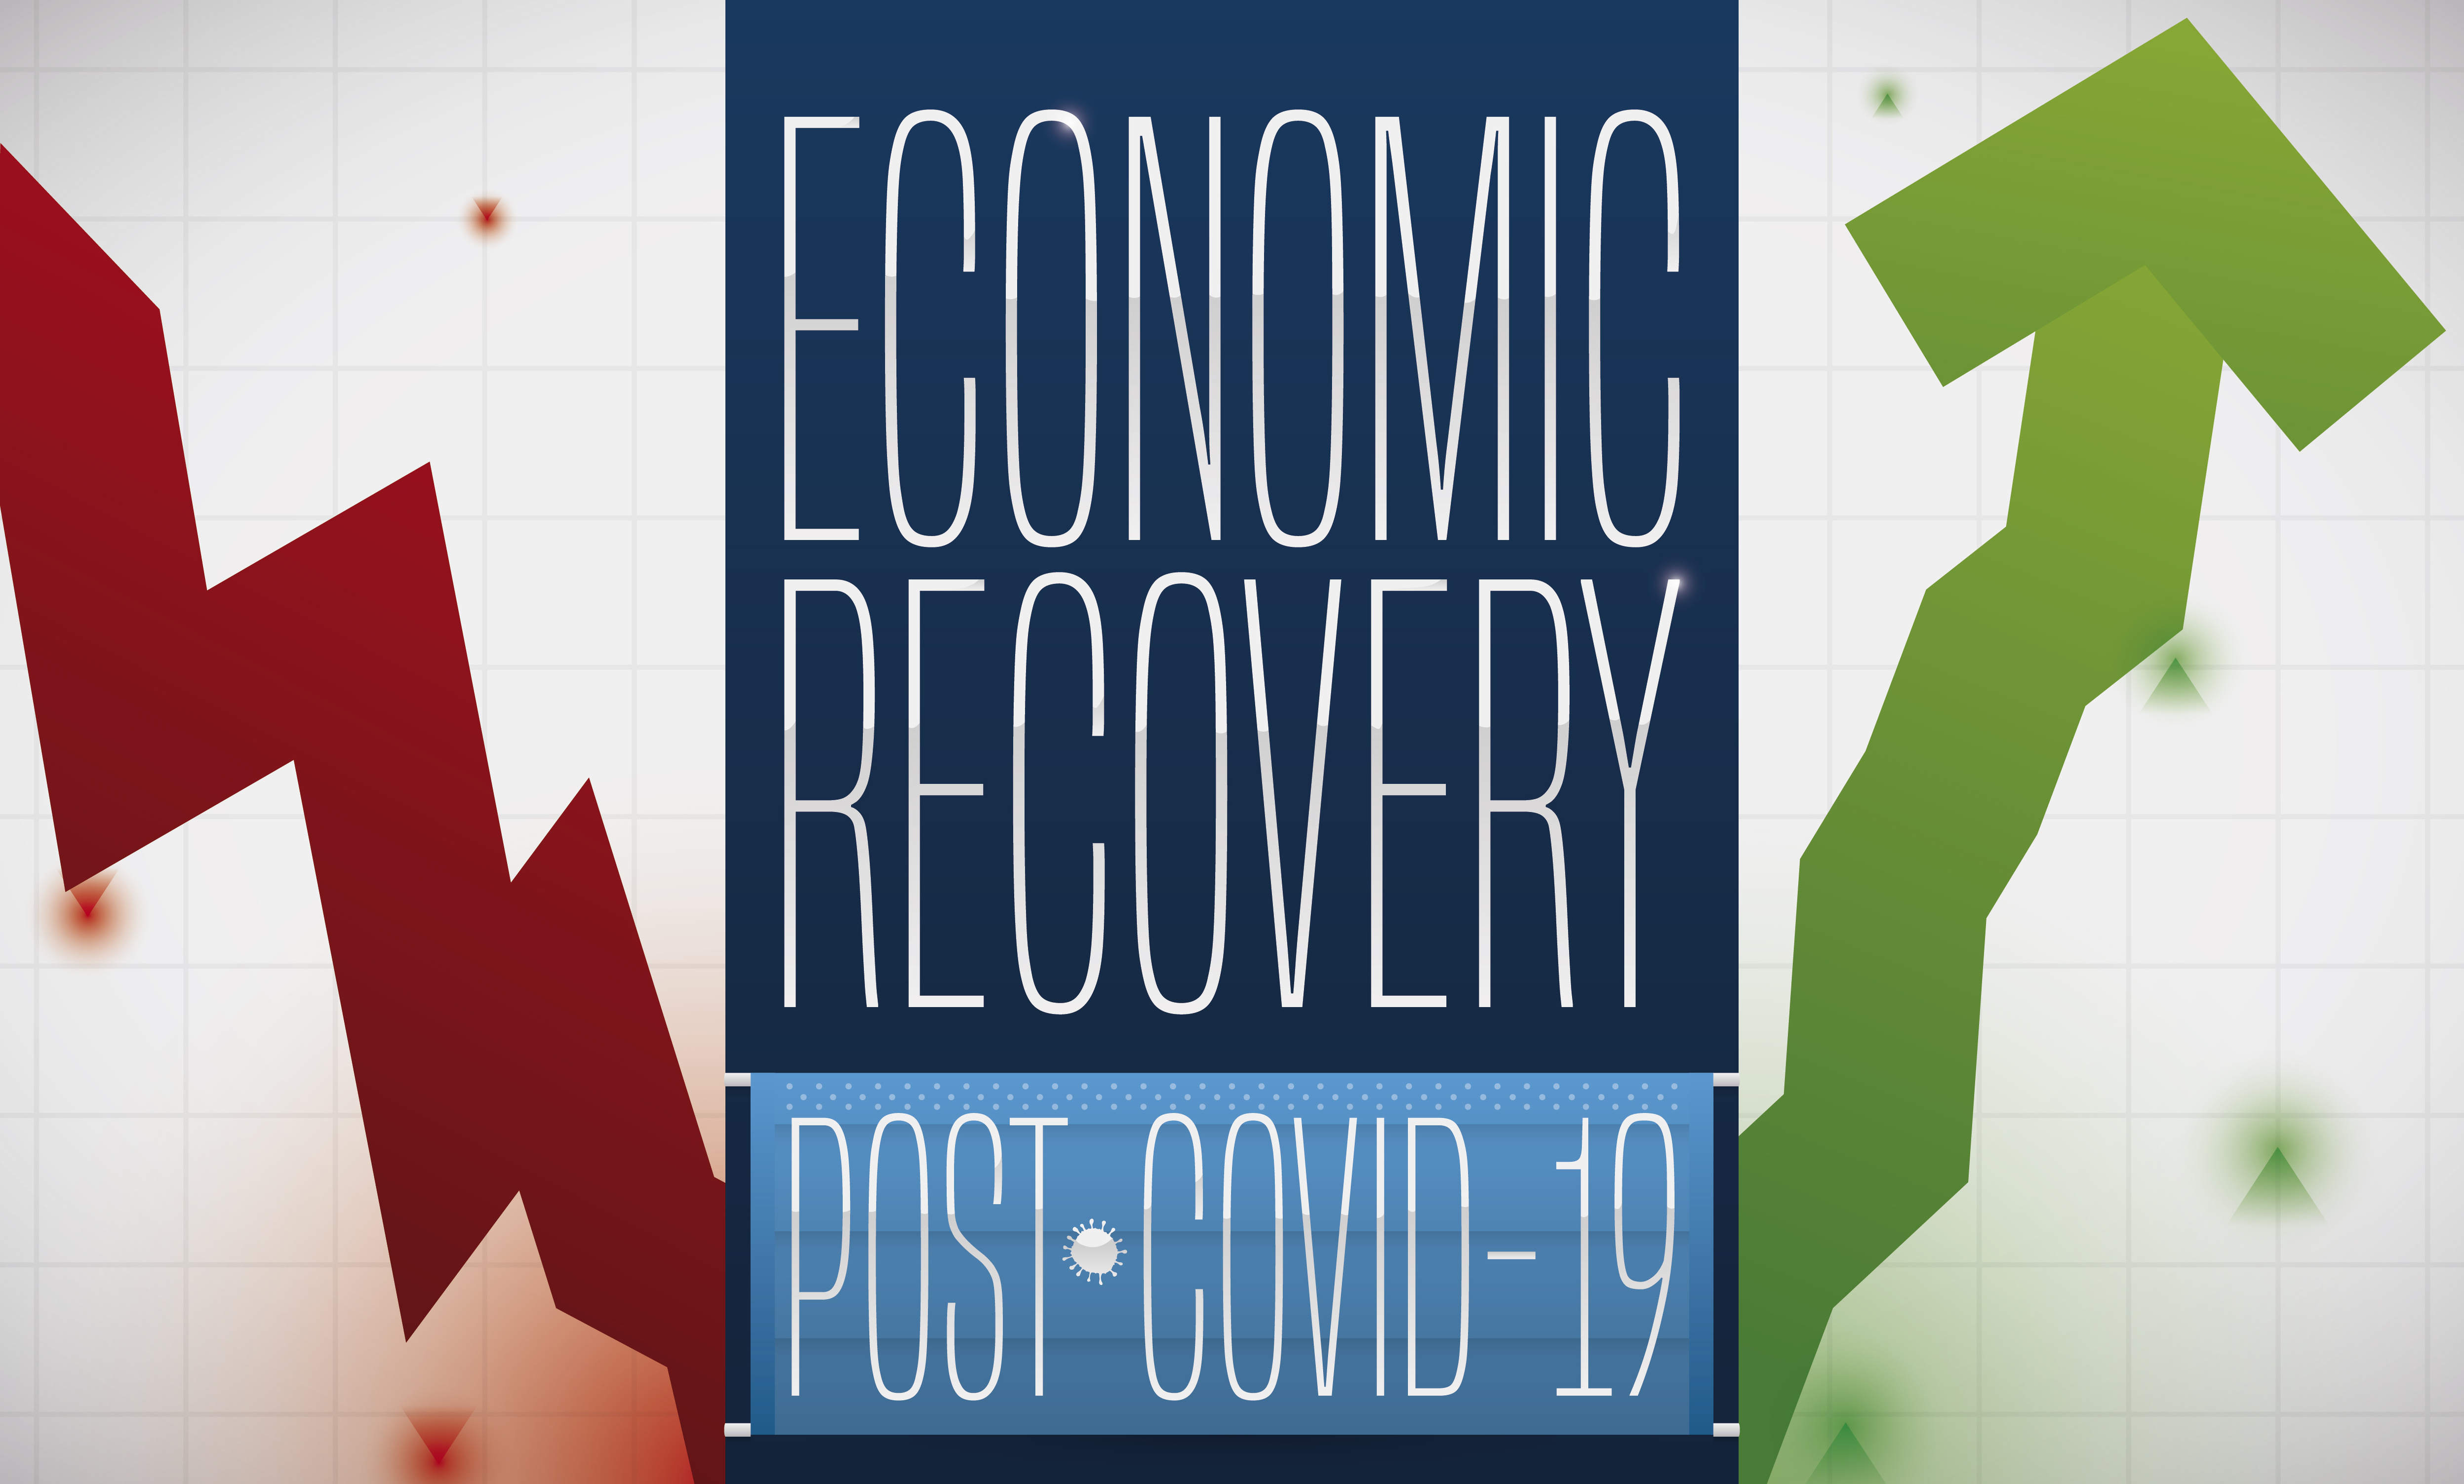 Arrows, Graph and Half-mask Depicting the Economic Recovery Post COVID-19, Vector Illustration